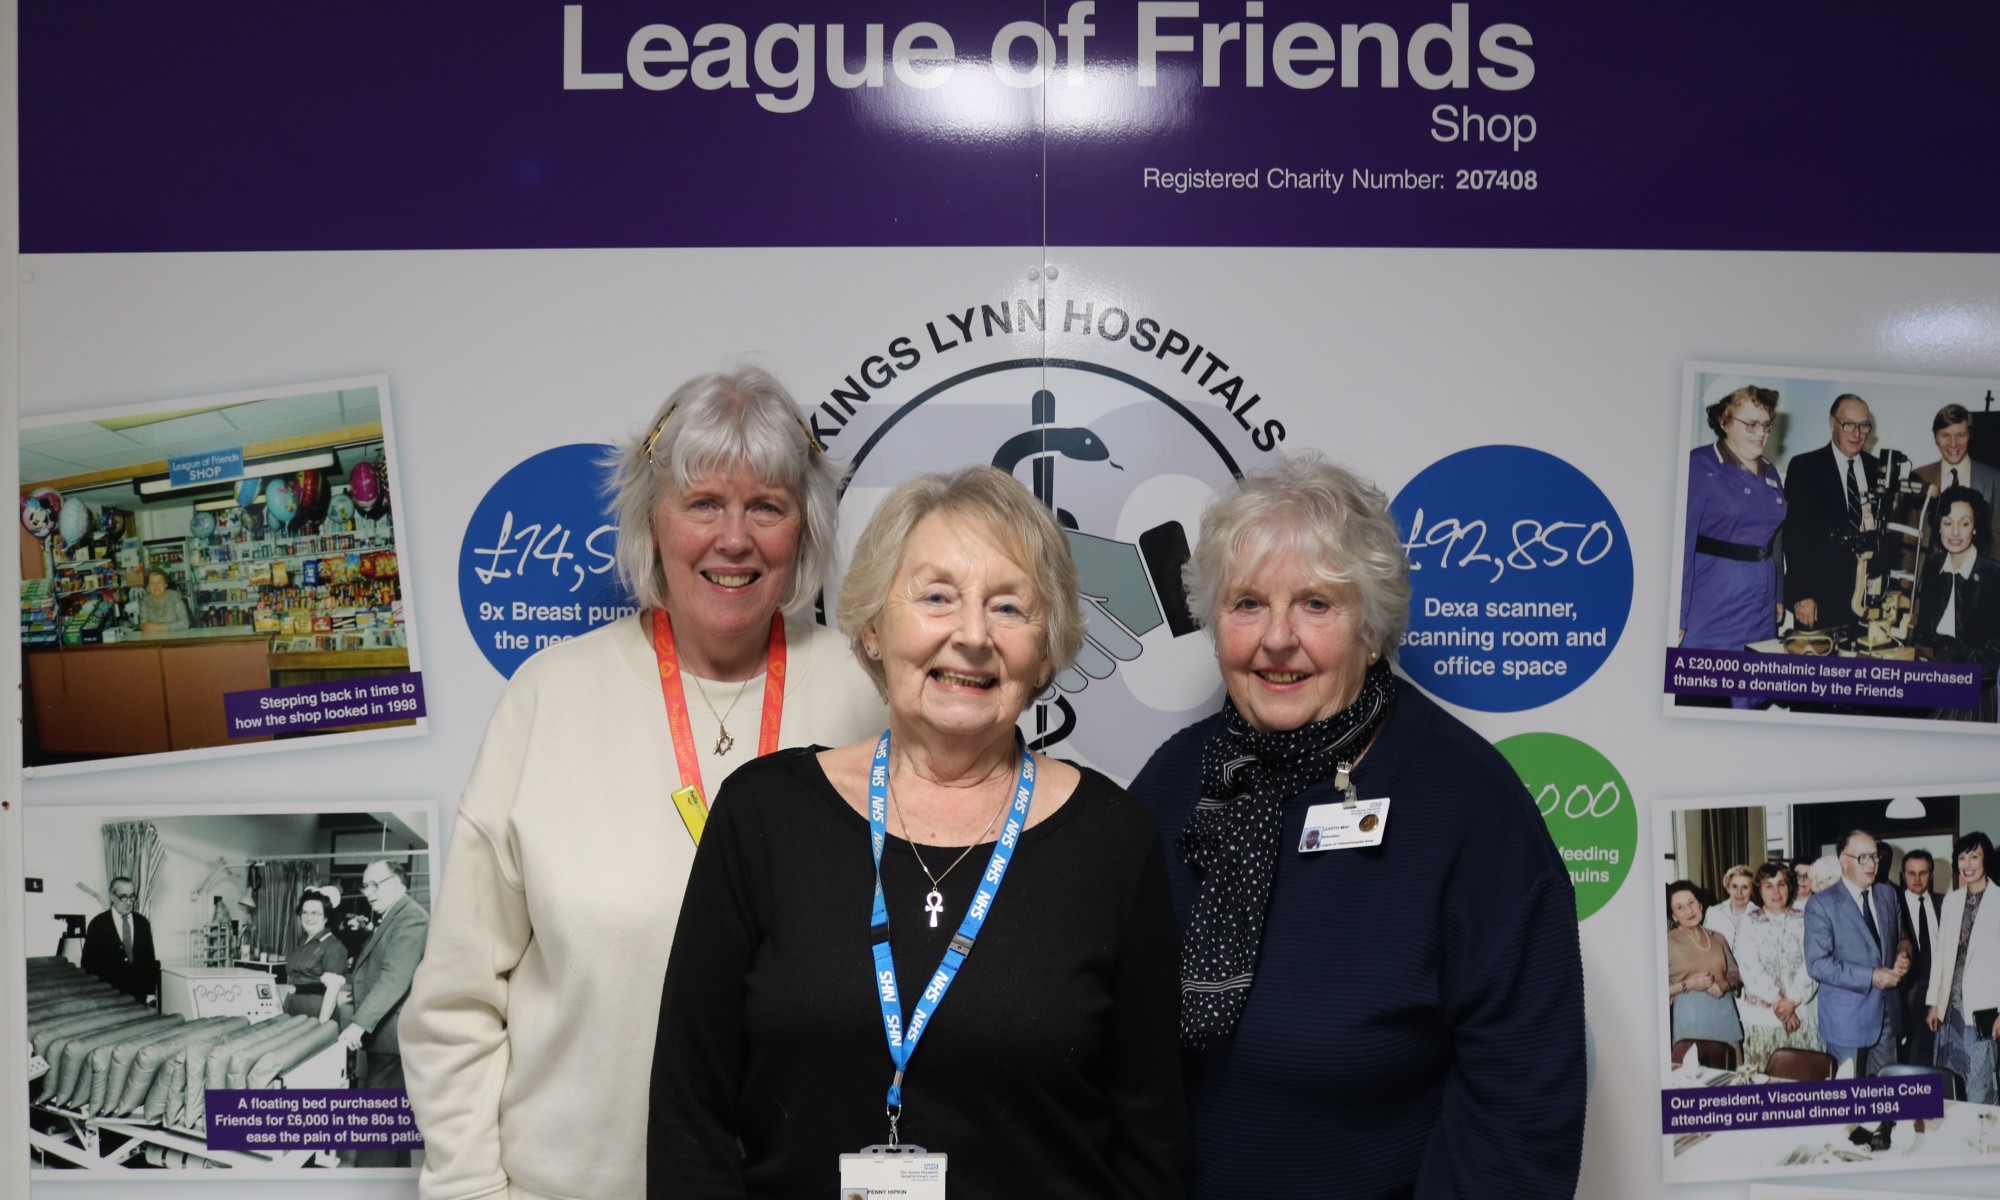 A picture of Marie Long, Penny Hipkin and Judy May standing in front of The League of Friends shop.